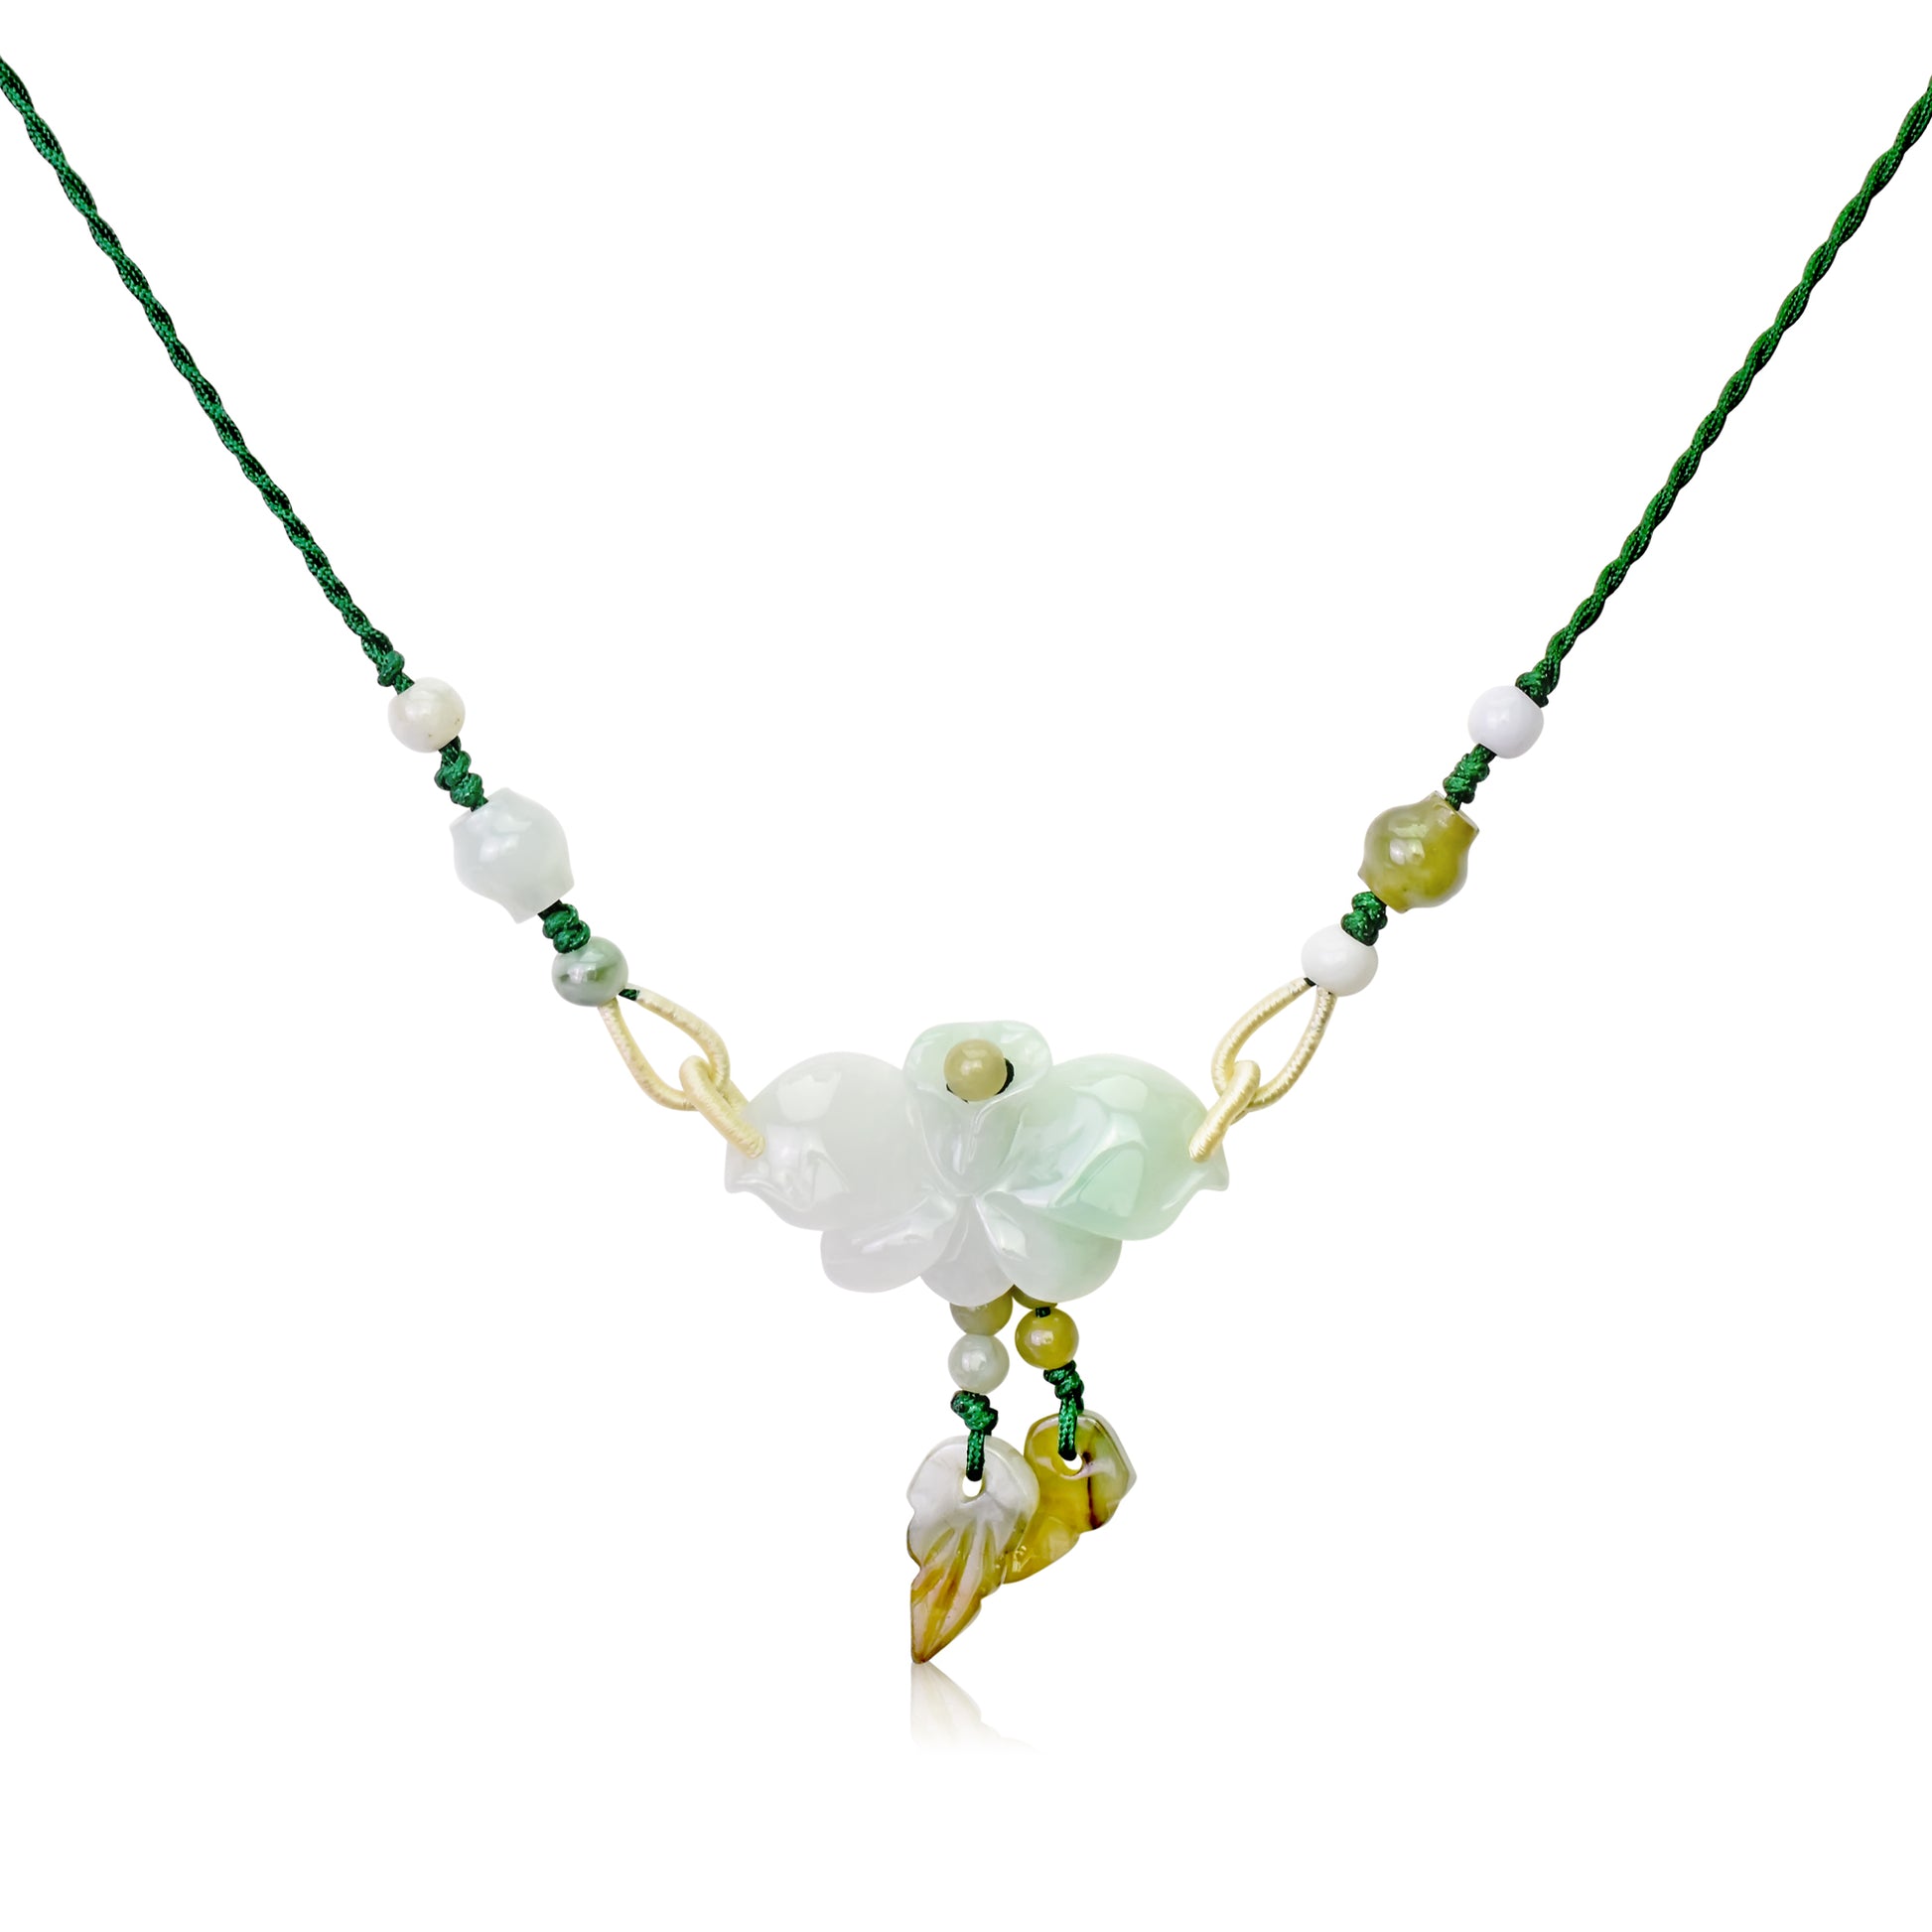 Handcrafted Elegance - Mini Orchid Jade Necklace made with Green Cord